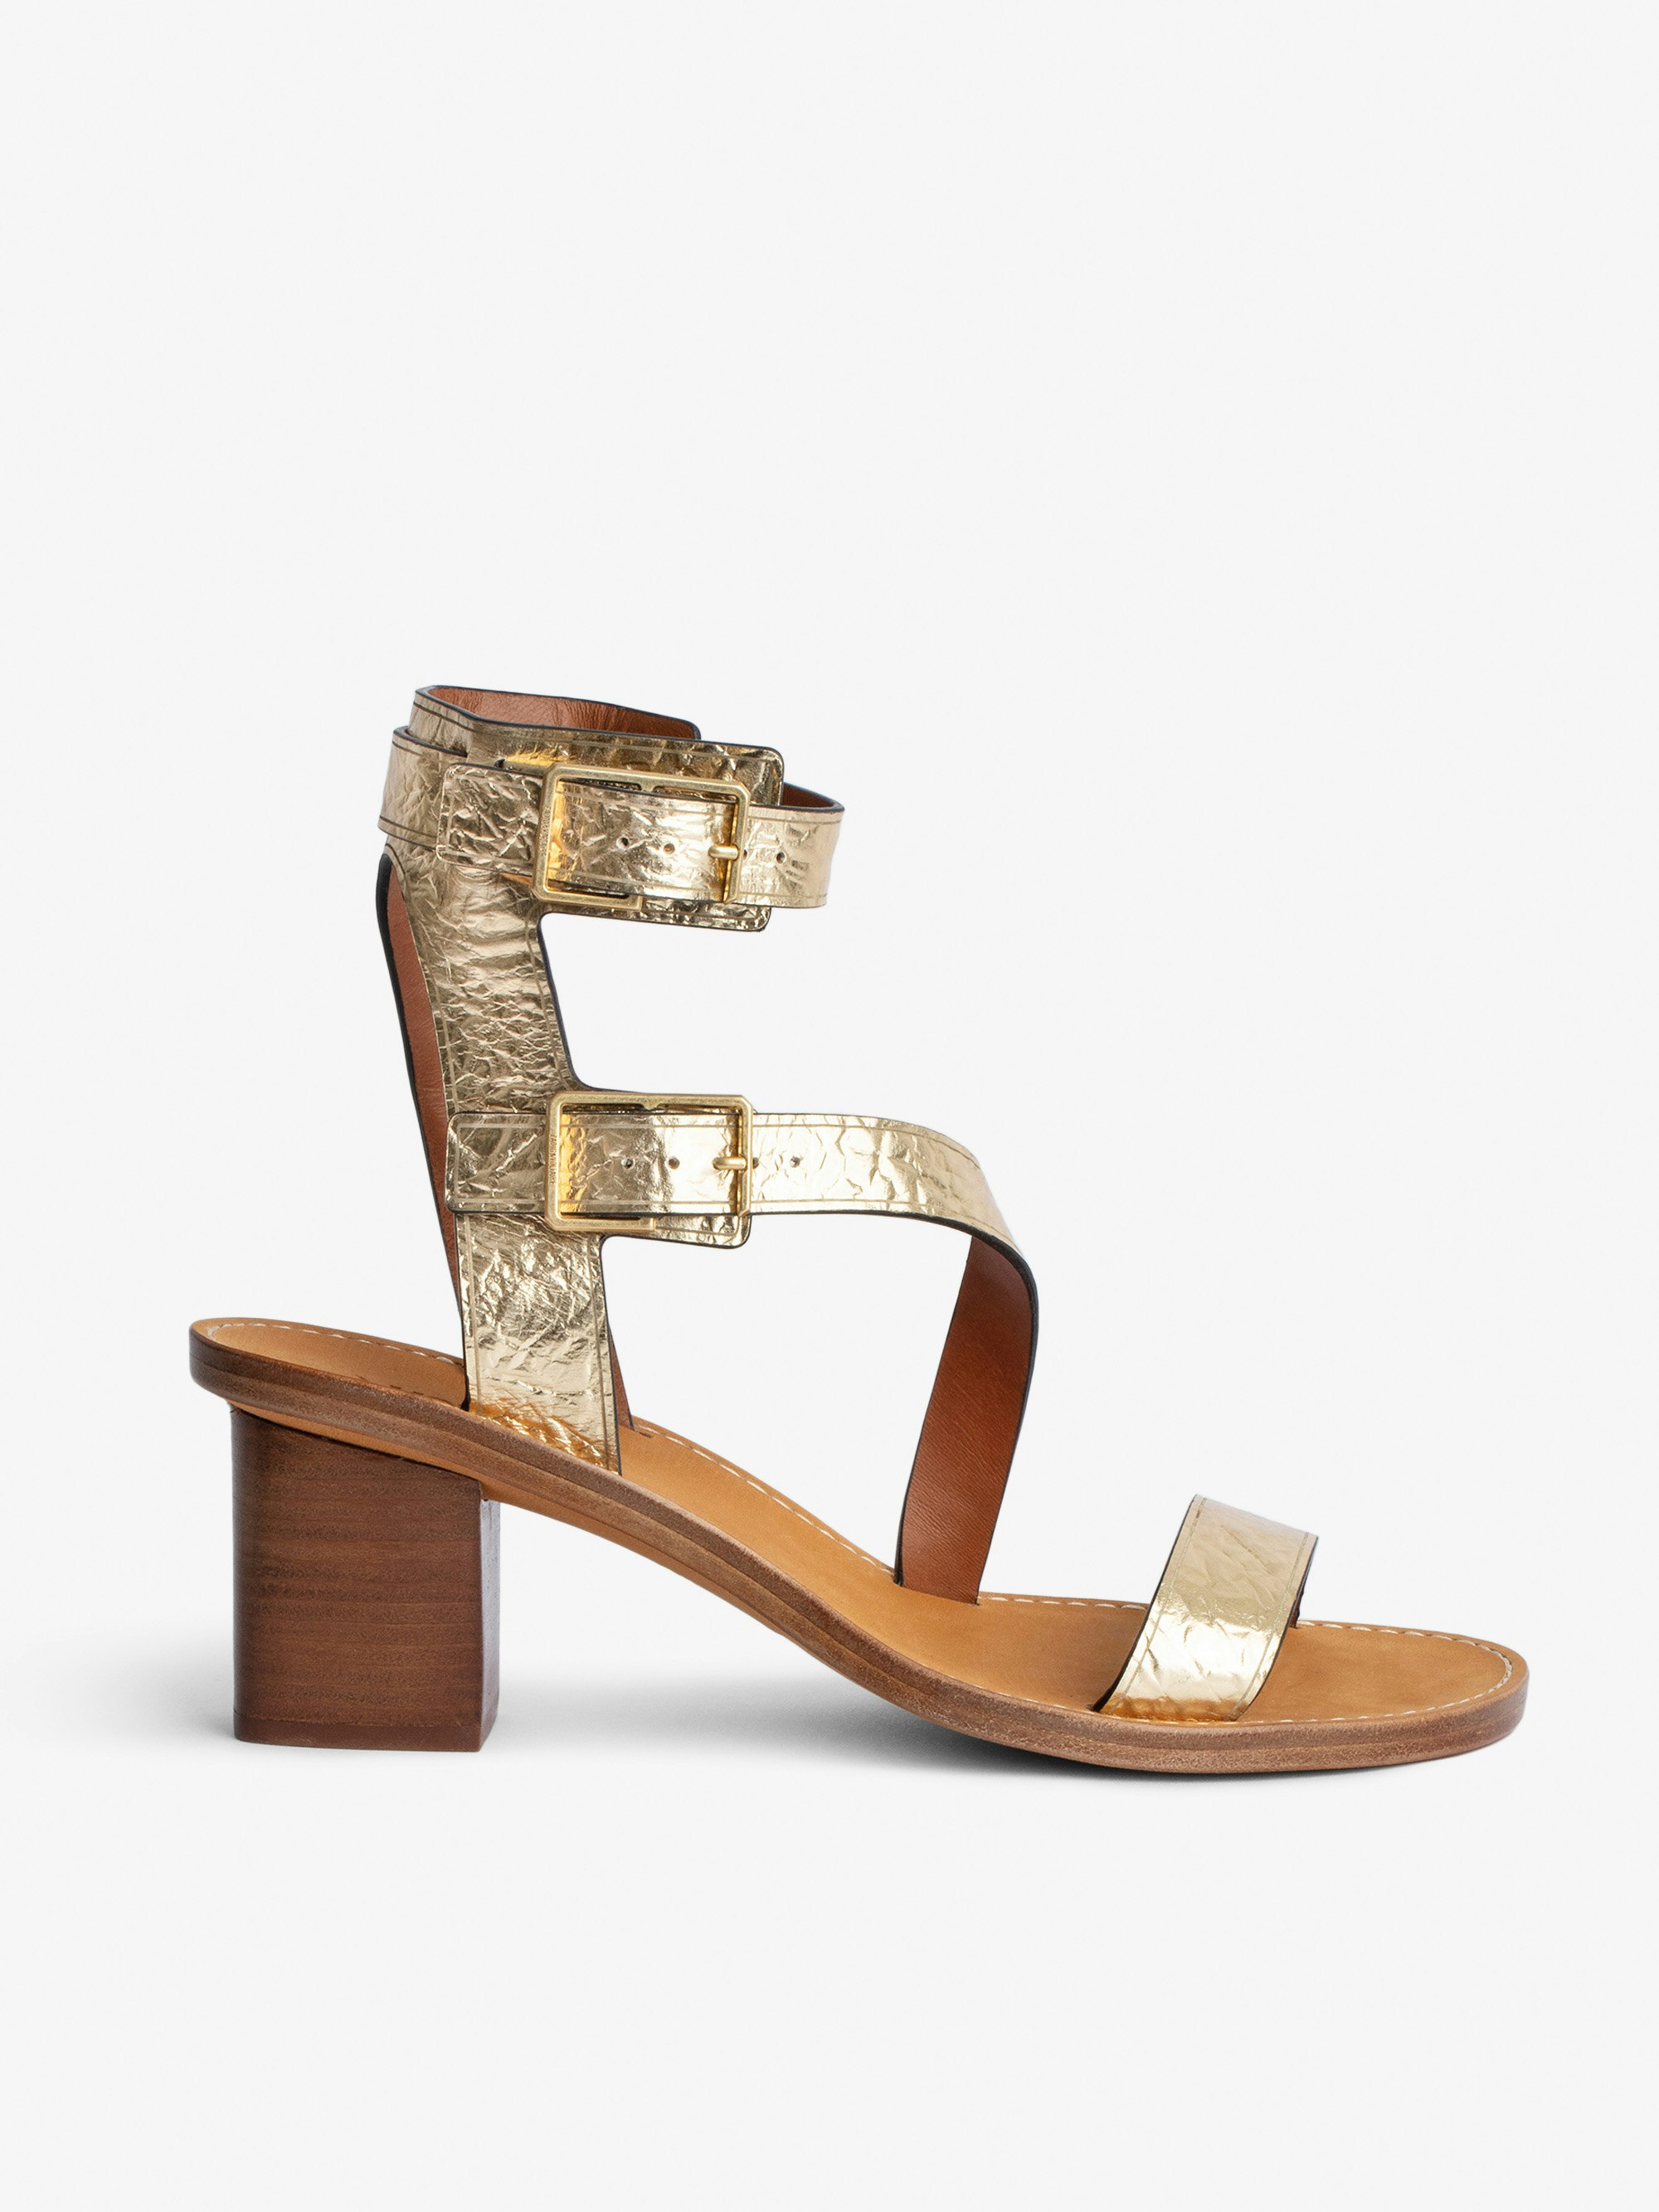 Cecilia Caprese Sandals - Women's high-top sandals in metallic, crinkled leather with straps and C-shaped buckles